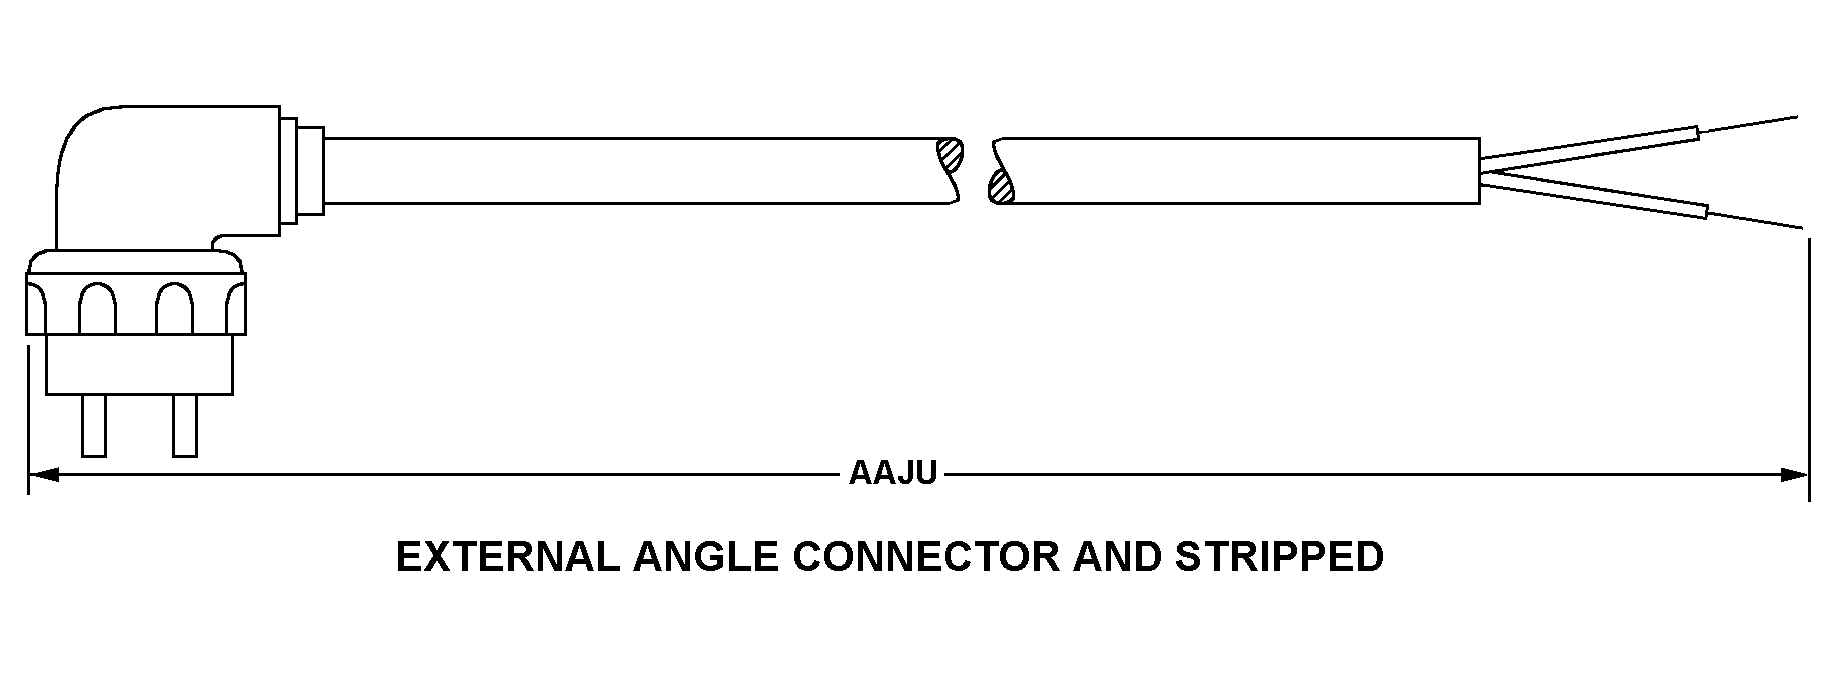 EXTERNAL ANGLE CONNECTOR AND STRIPPED style nsn 5995-01-190-4771